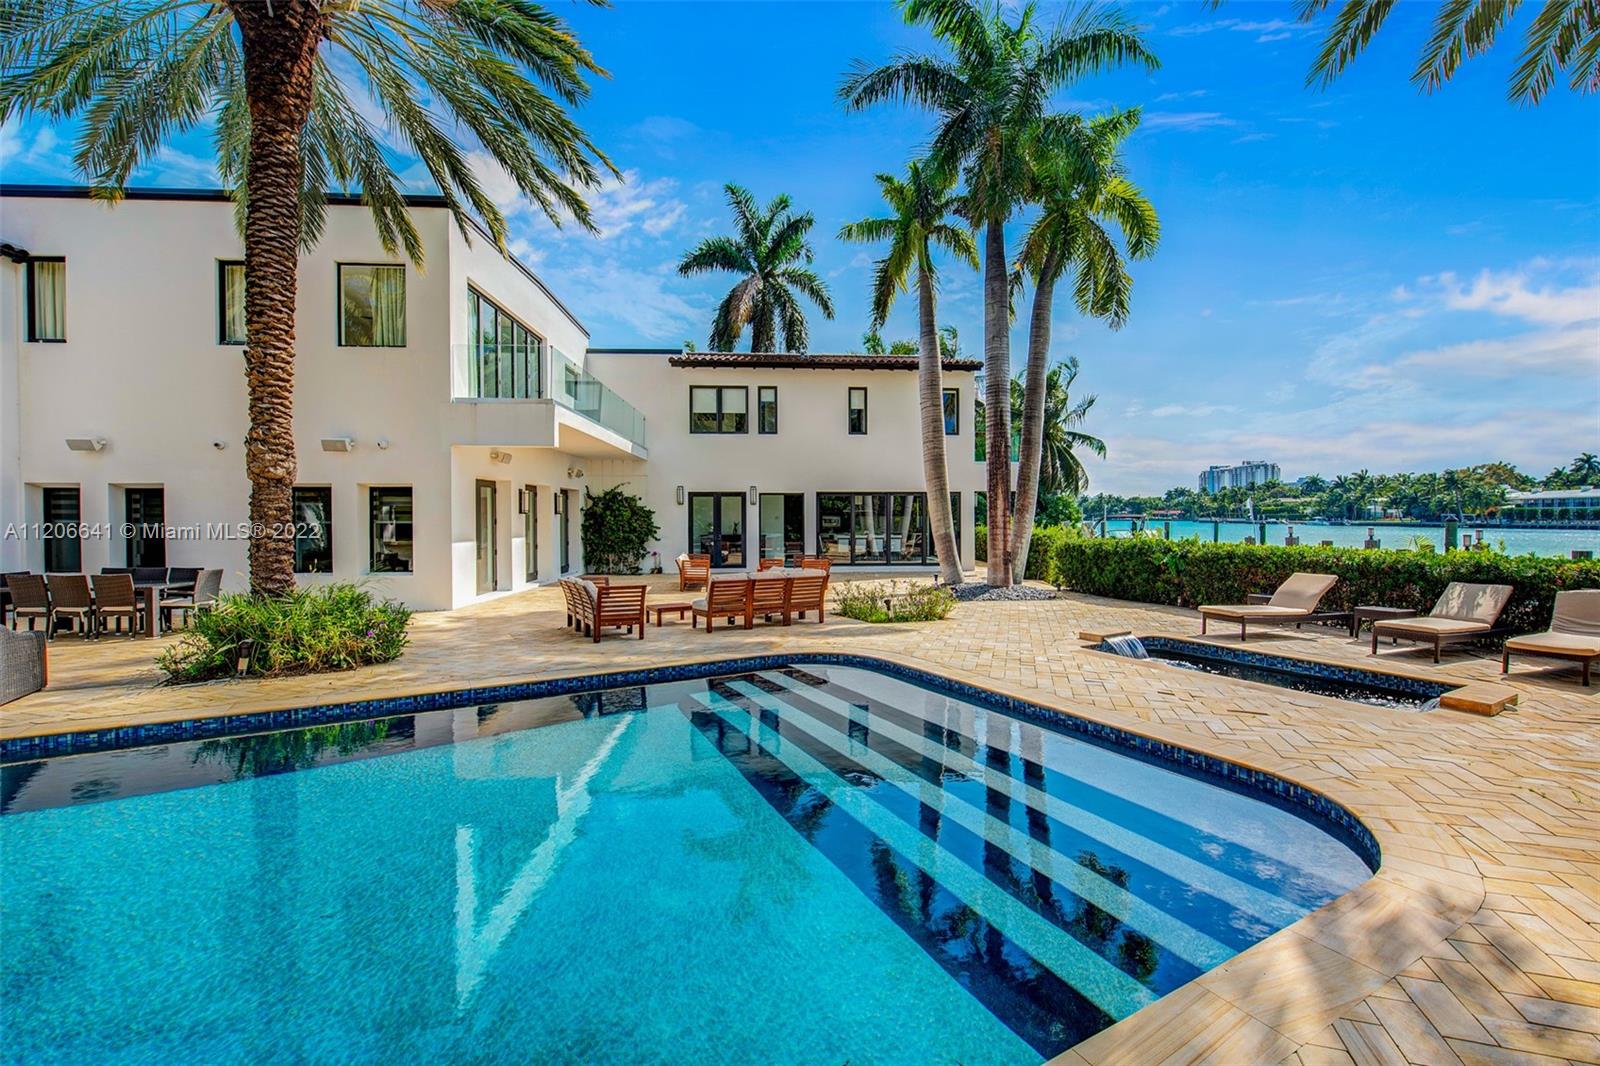 Architecturally stunning waterfront estate with open water views on the prestigious North Bay Road. Sitting on an expansive 27,000 SF lot, this two-story 10,114 living SF residence was built by MV Group USA and is designer furnished, featuring sleek, luxurious details throughout. Offering 100 feet of prime water frontage, you'll enjoy a marvelous outdoor area with a large pool, jacuzzi, spa, dock, and boat lift, no fixed bridges to the bay, and lush landscaping for ultimate privacy. Renovated in 2015, this 11 Bedroom / 12.3 Bathroom estate boasts an enviable sophisticated lifestyle complete with a guesthouse, 3-parking garages, gym, office, master suite with balcony, and more!